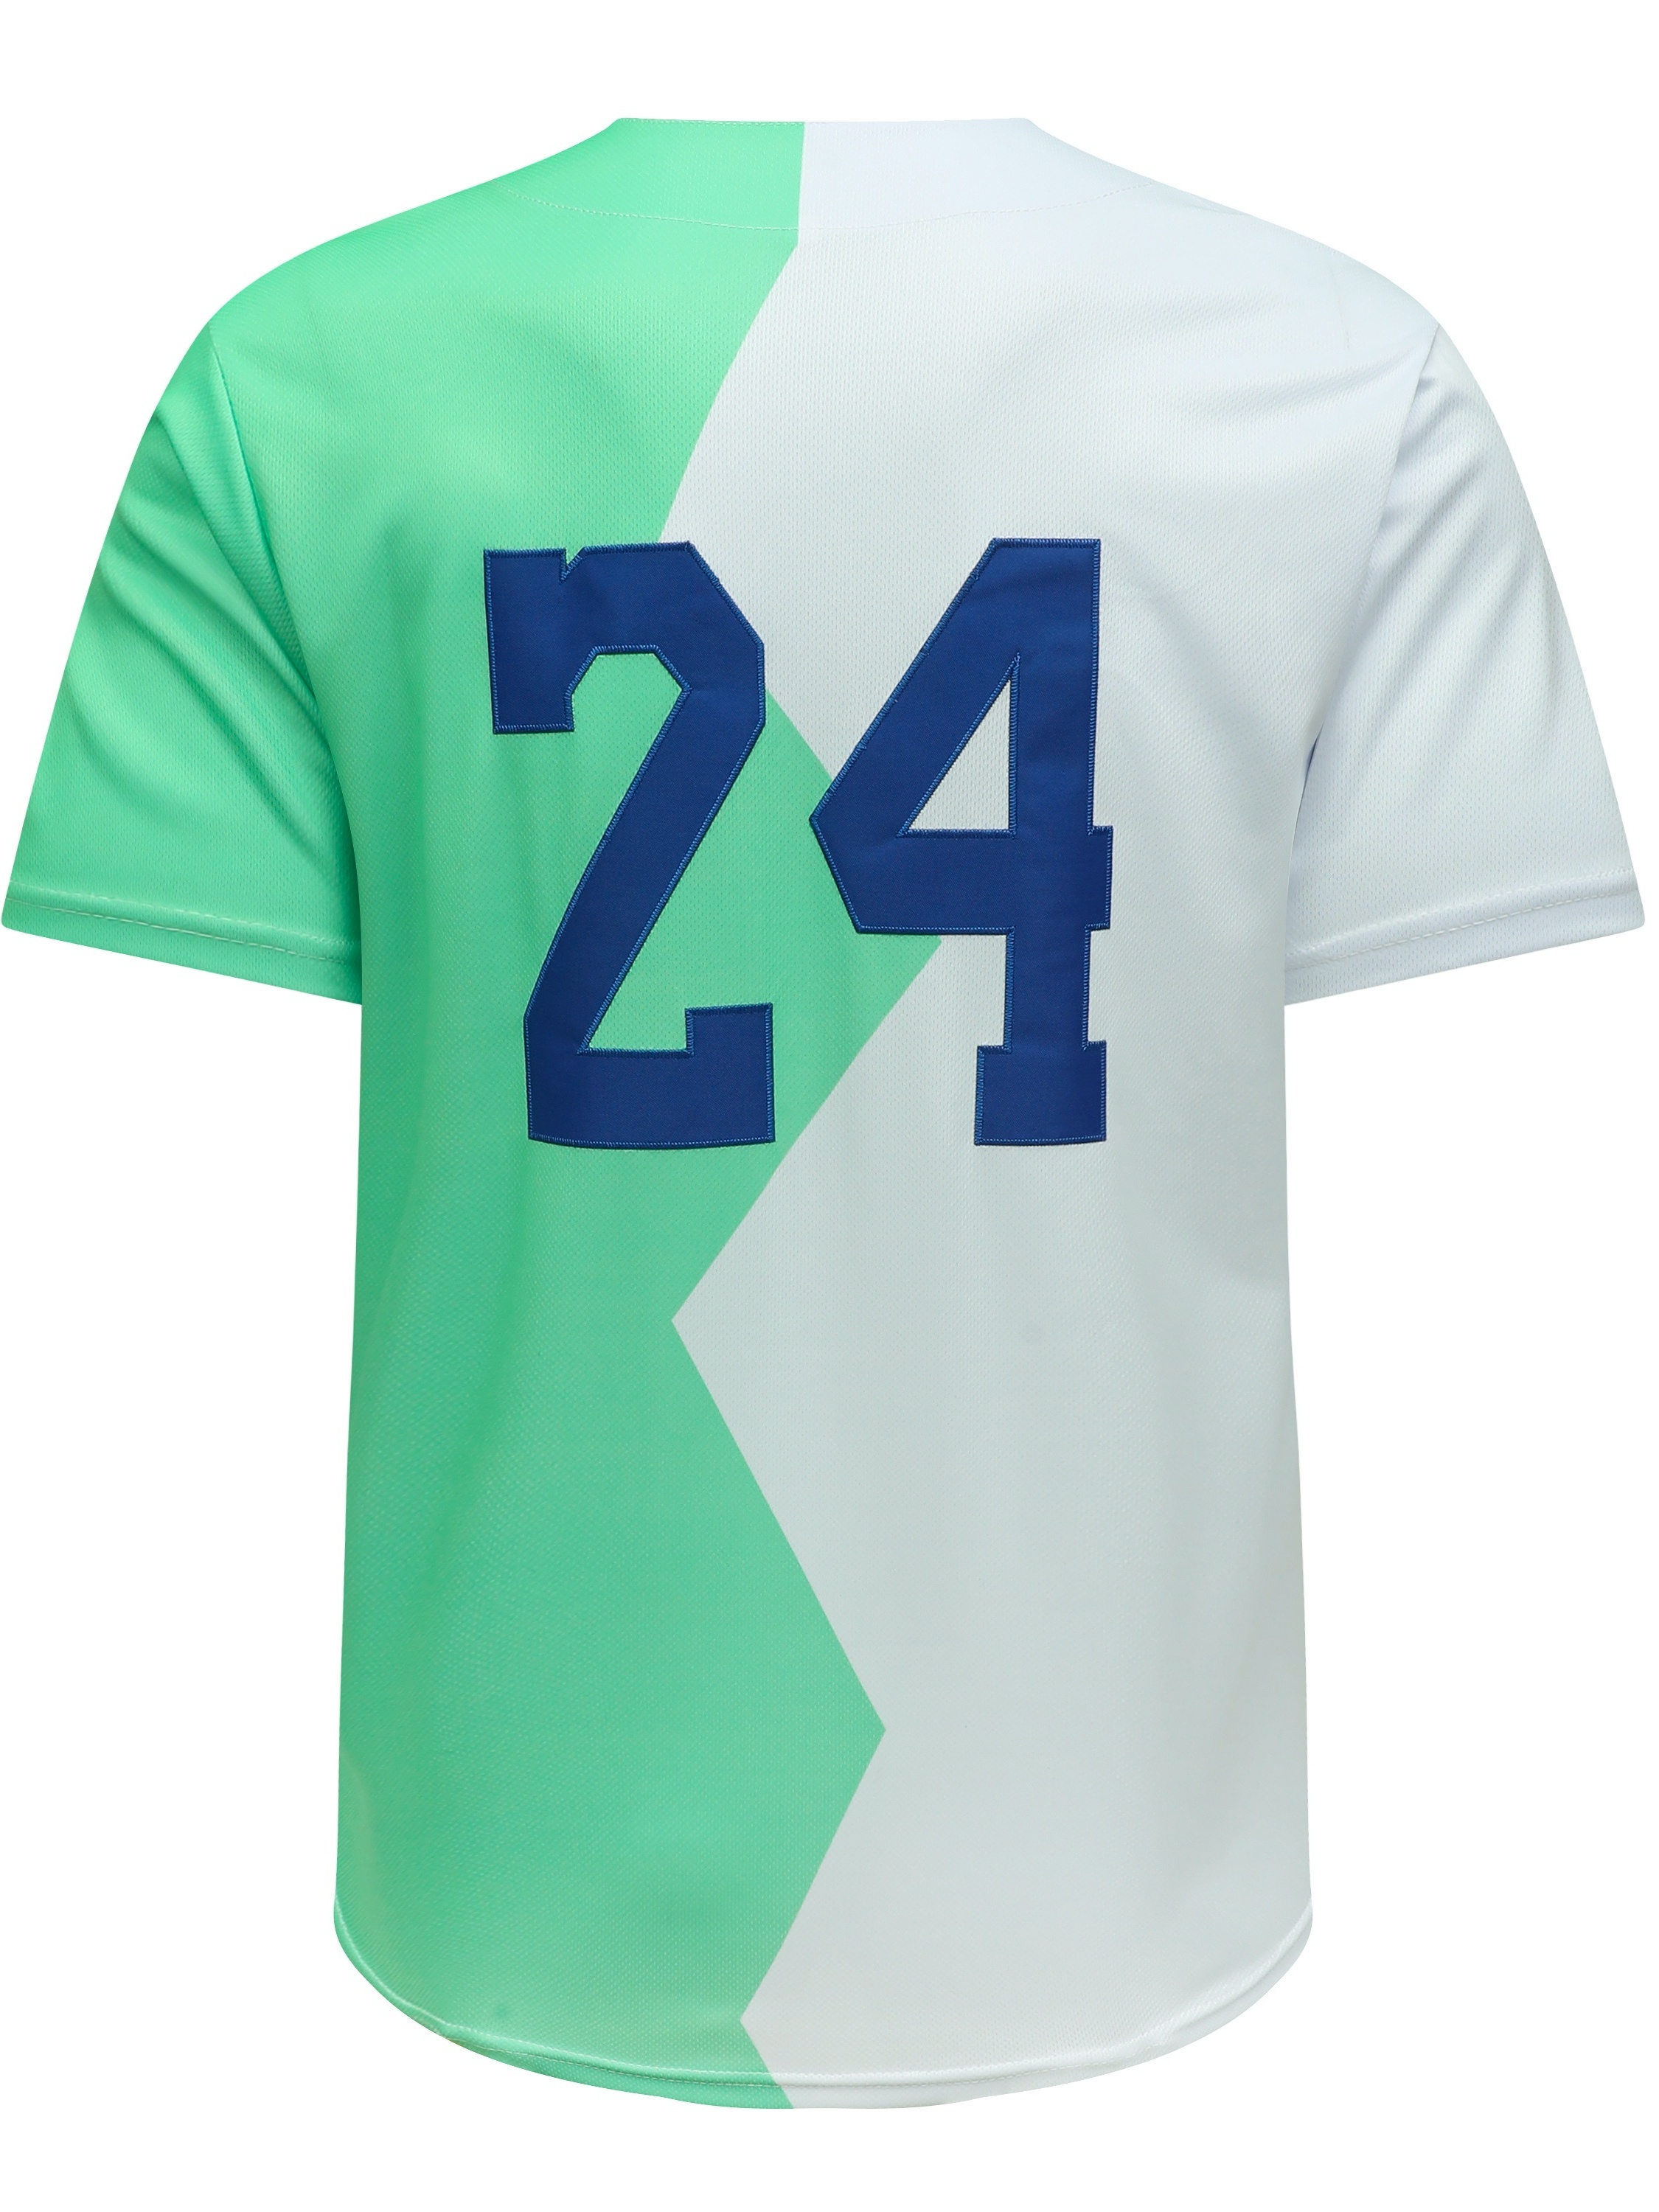 Men's Legend #24 Baseball Jersey, Active Slightly Stretch Breathable Button Up Short Sleeve Uniform Baseball Shirt for Training Competition,Temu